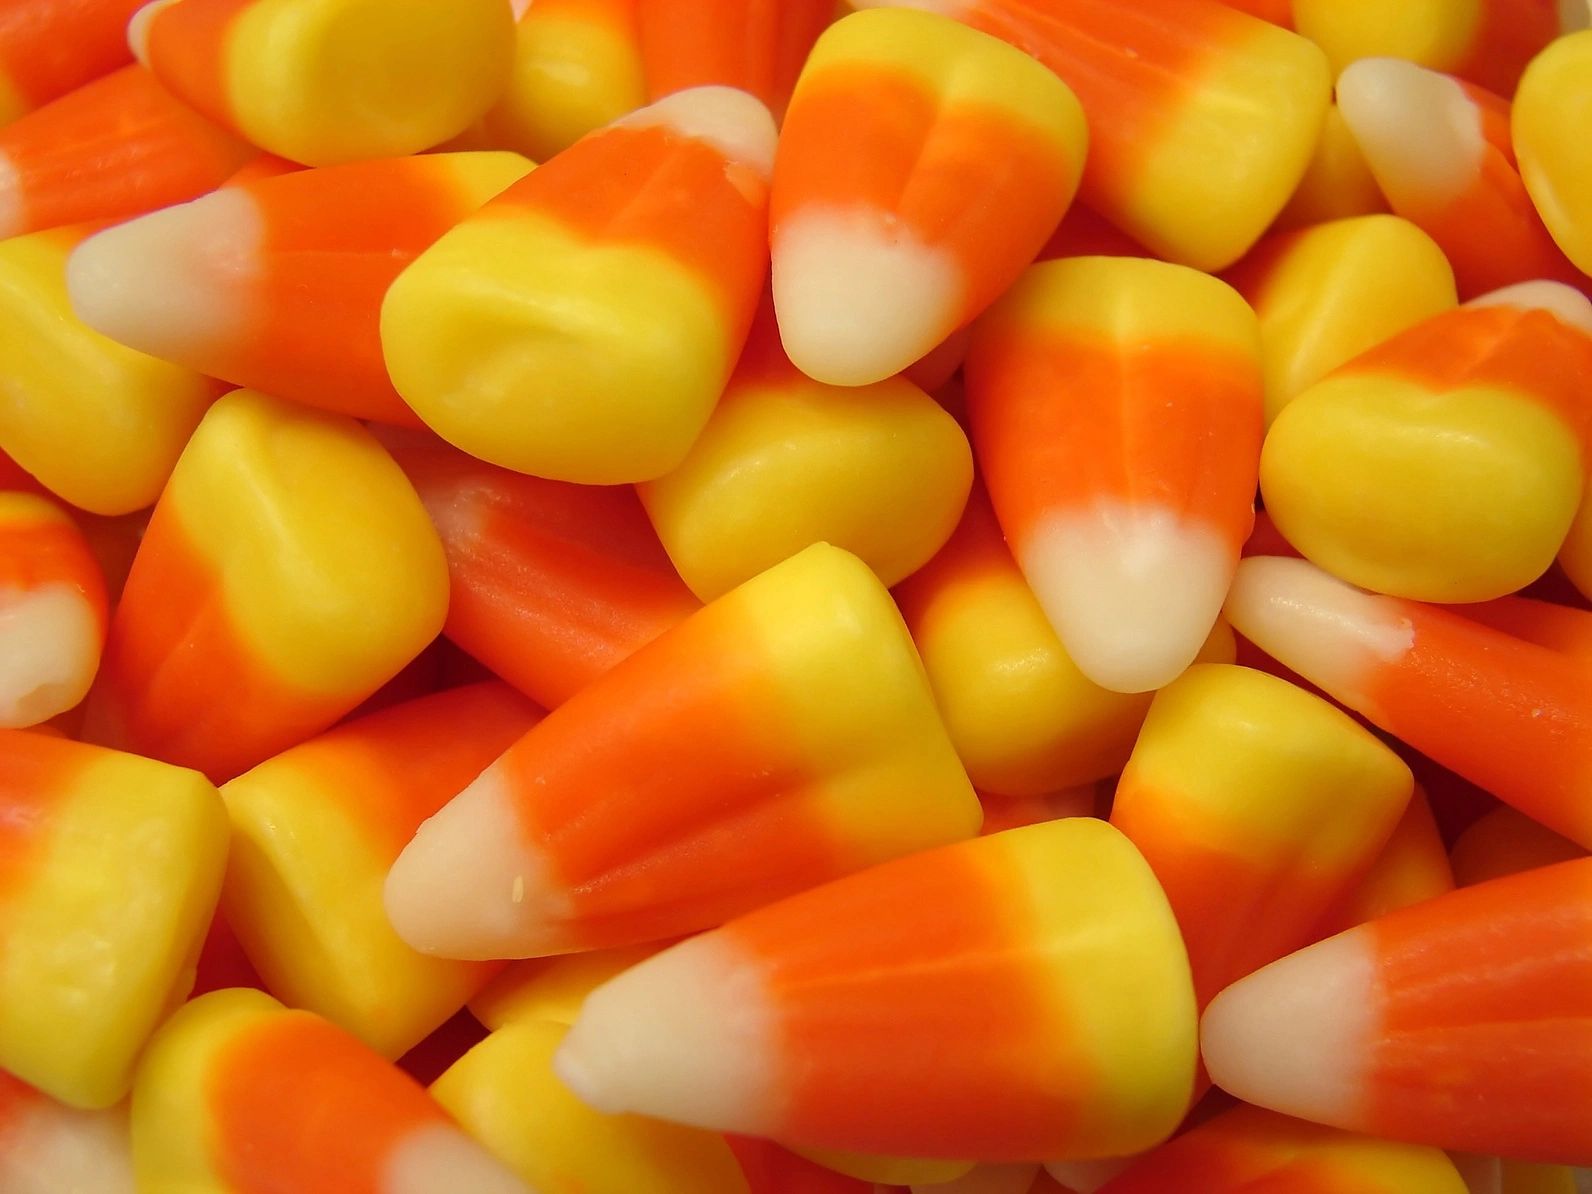 Don’t Eat the Halloween Candy!